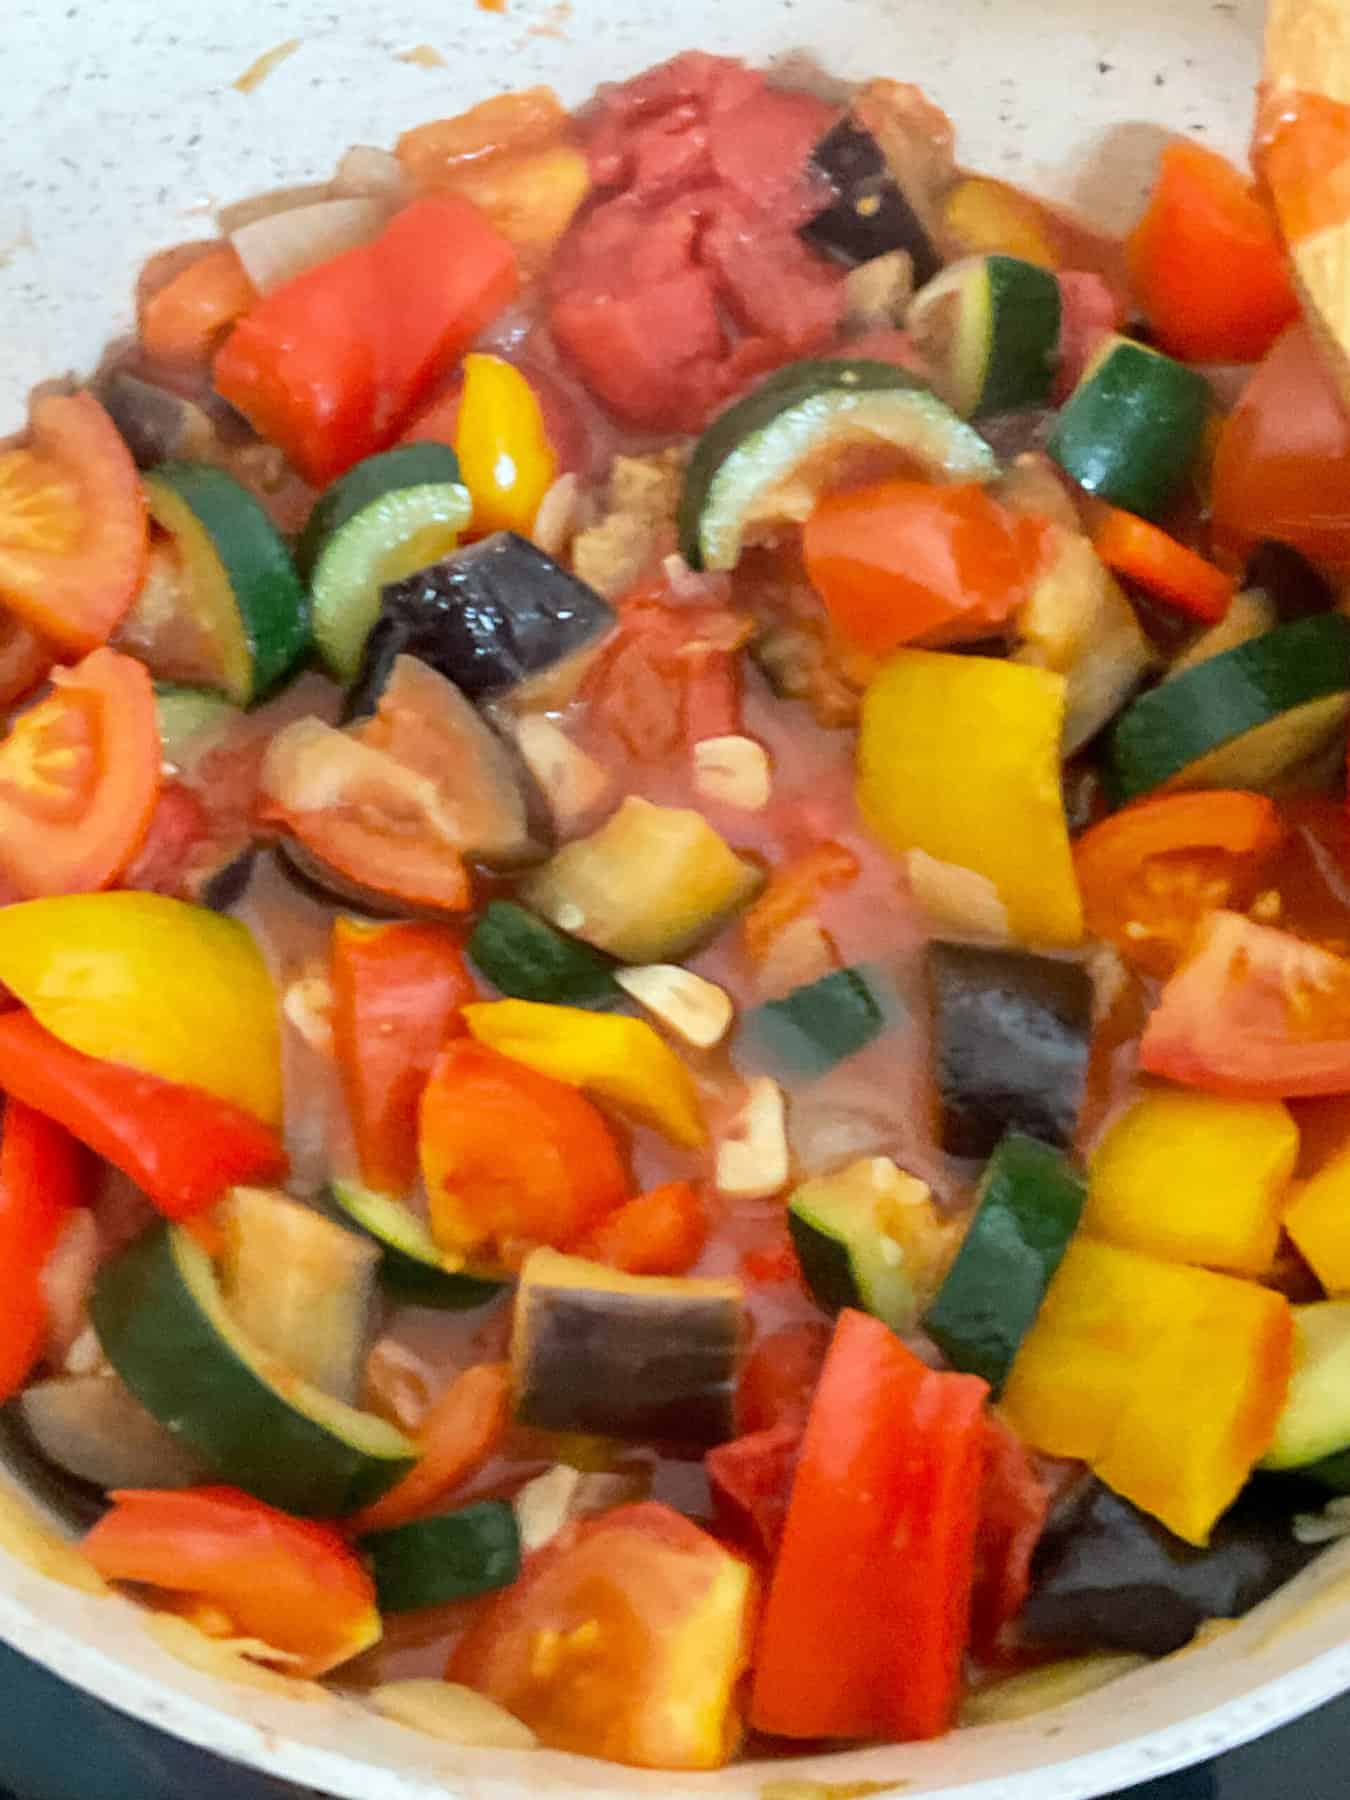 Ratatouille cooked and ready to be garnished.